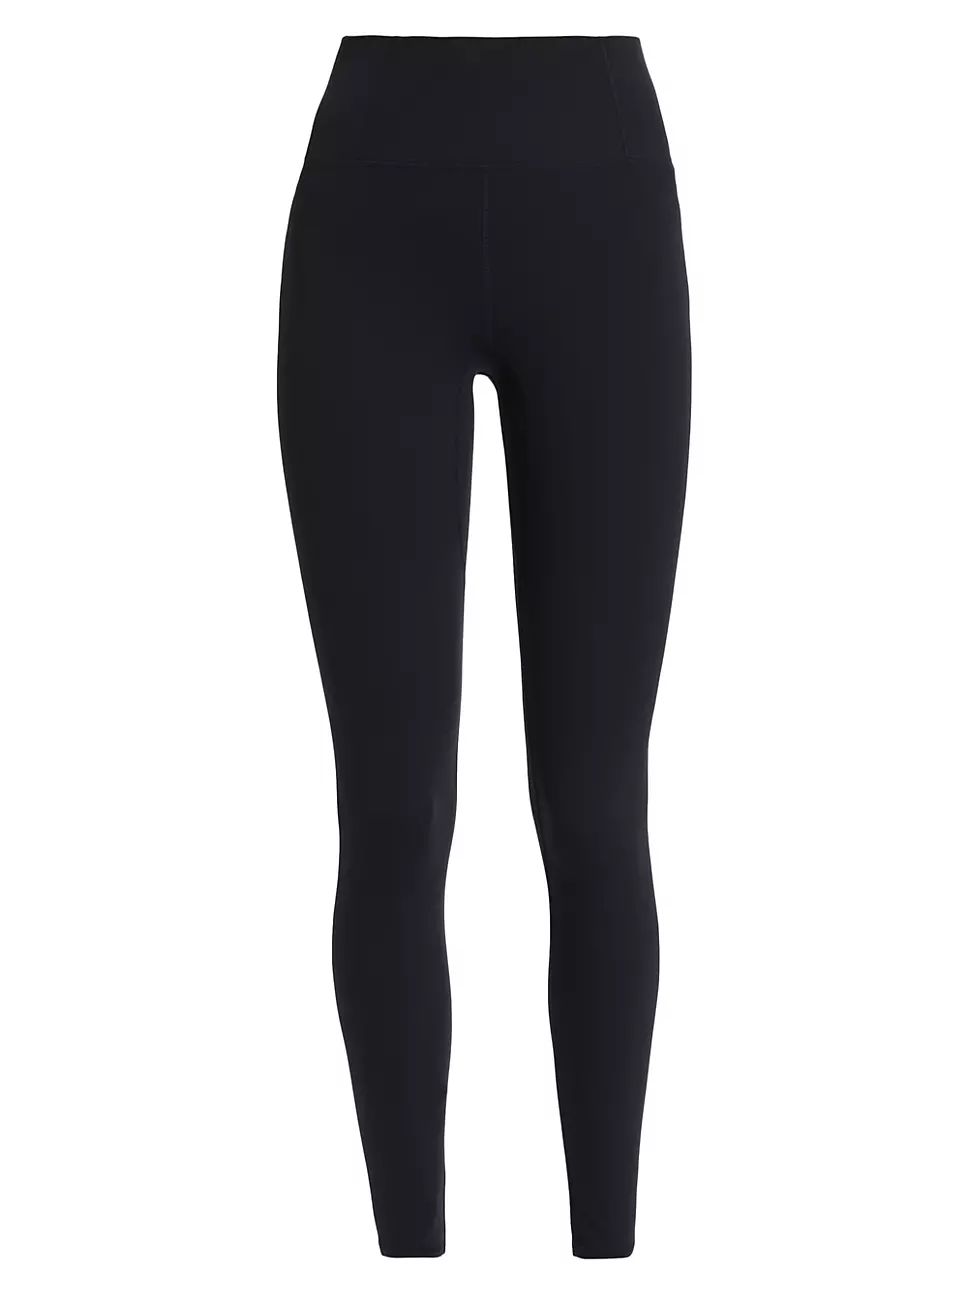 Never Better High-Rise Compression Leggings | Saks Fifth Avenue